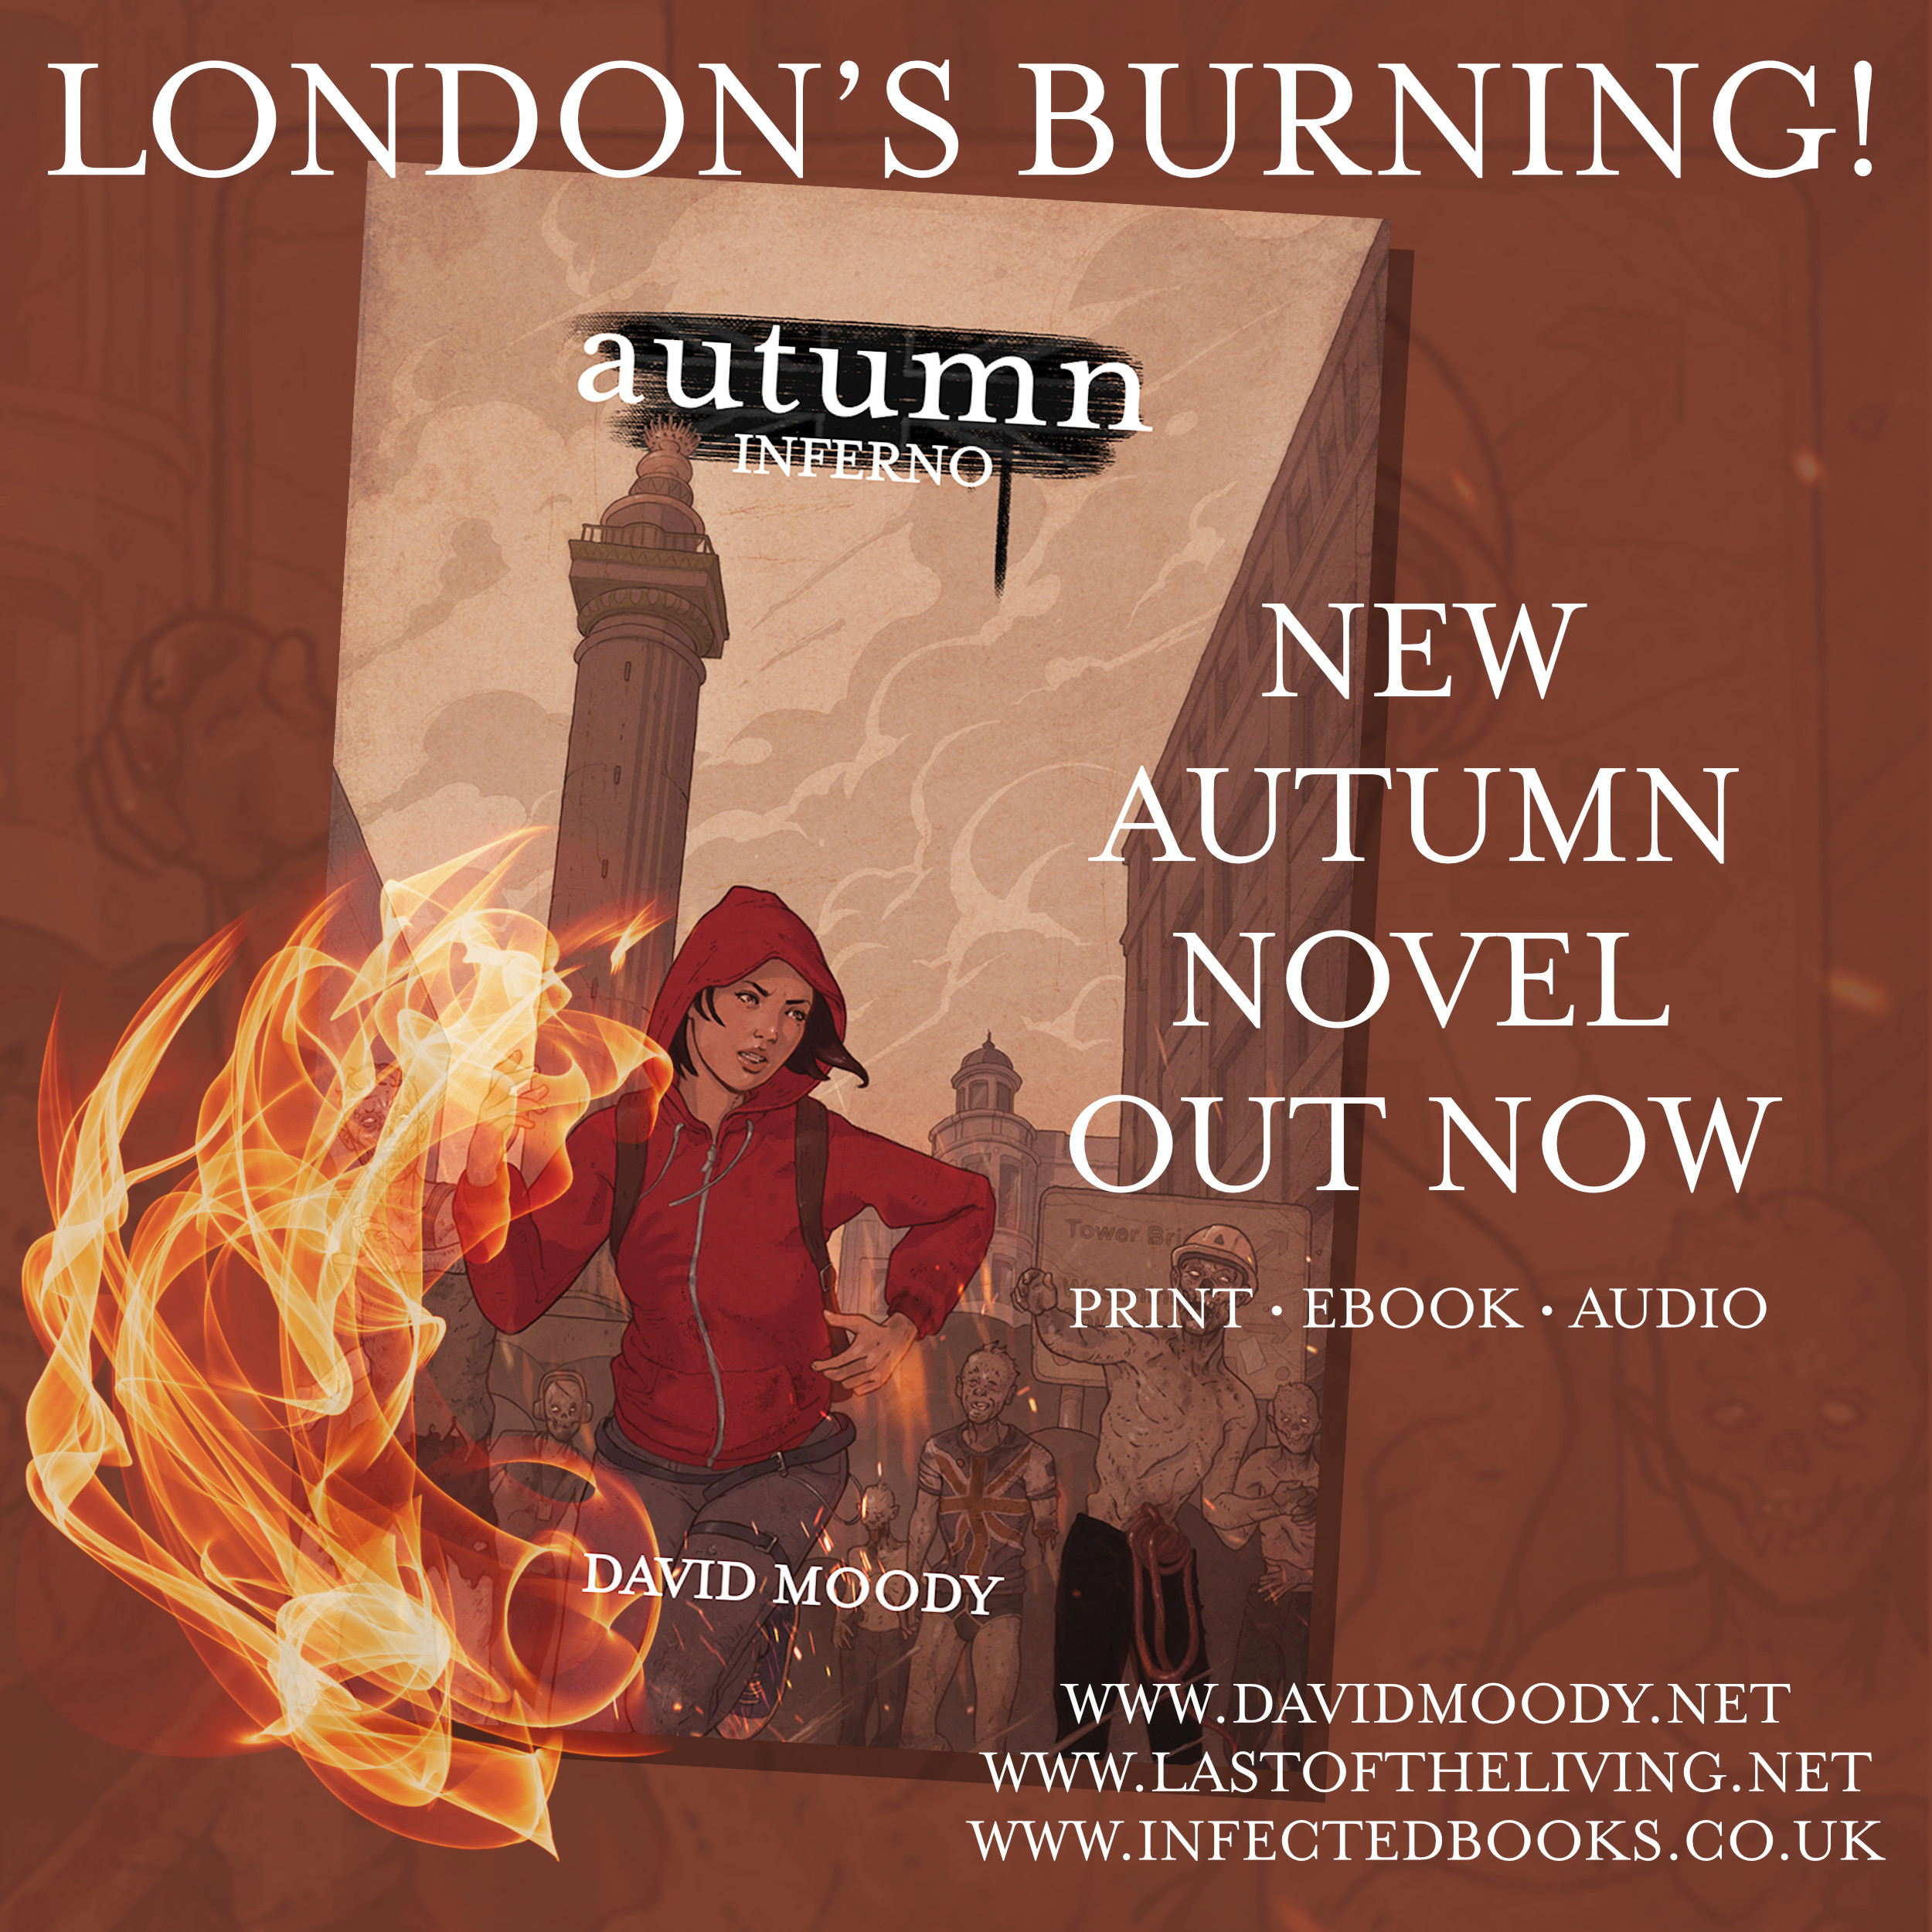 Autumn: Inferno by David Moody - book two of the London Trilogy